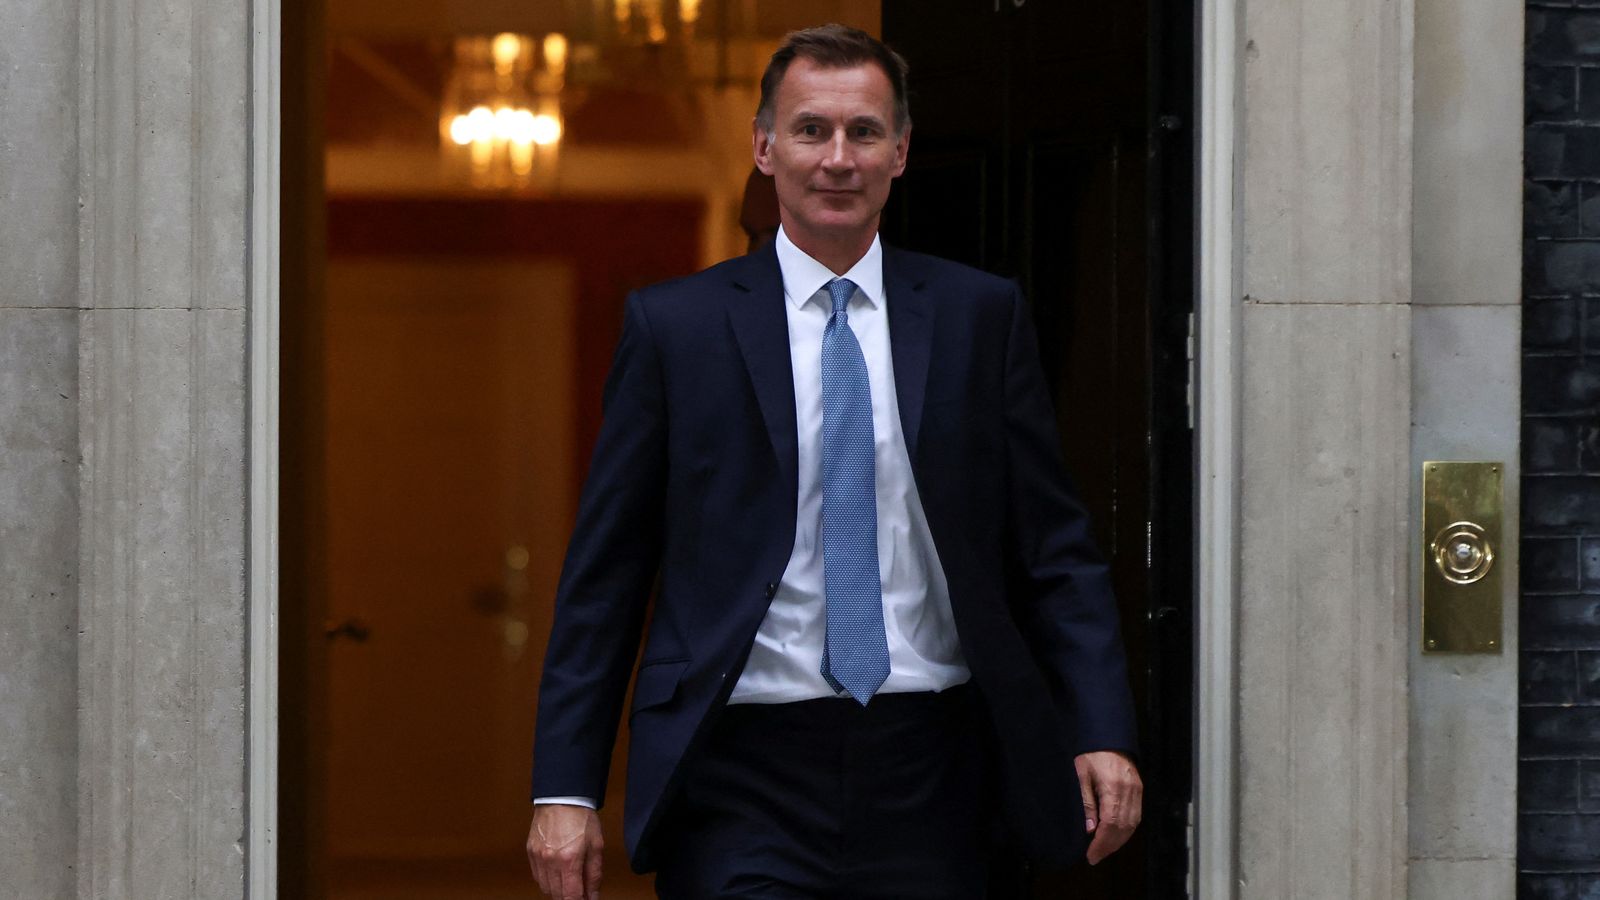 Chancellor Jeremy Hunt warns 'nothing off table' on tax cuts as senior Tory says government behaving like 'libertarian jihadists'